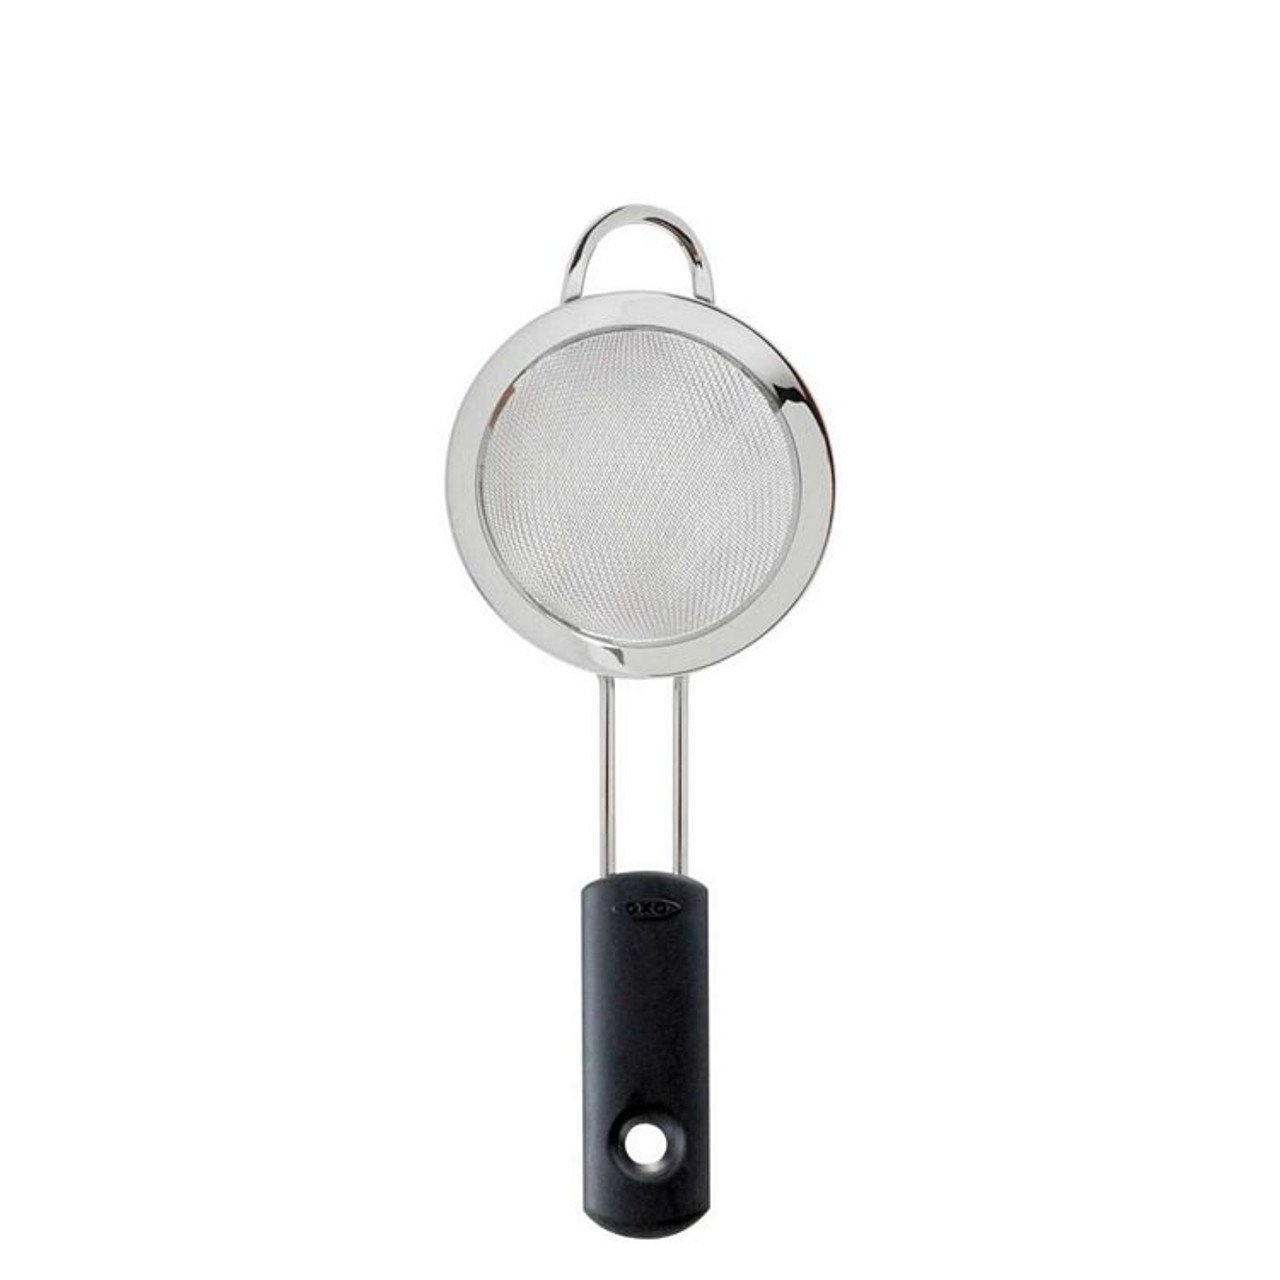 Oxo Good Grips Sink Strainer and Stopper, 2-in-1